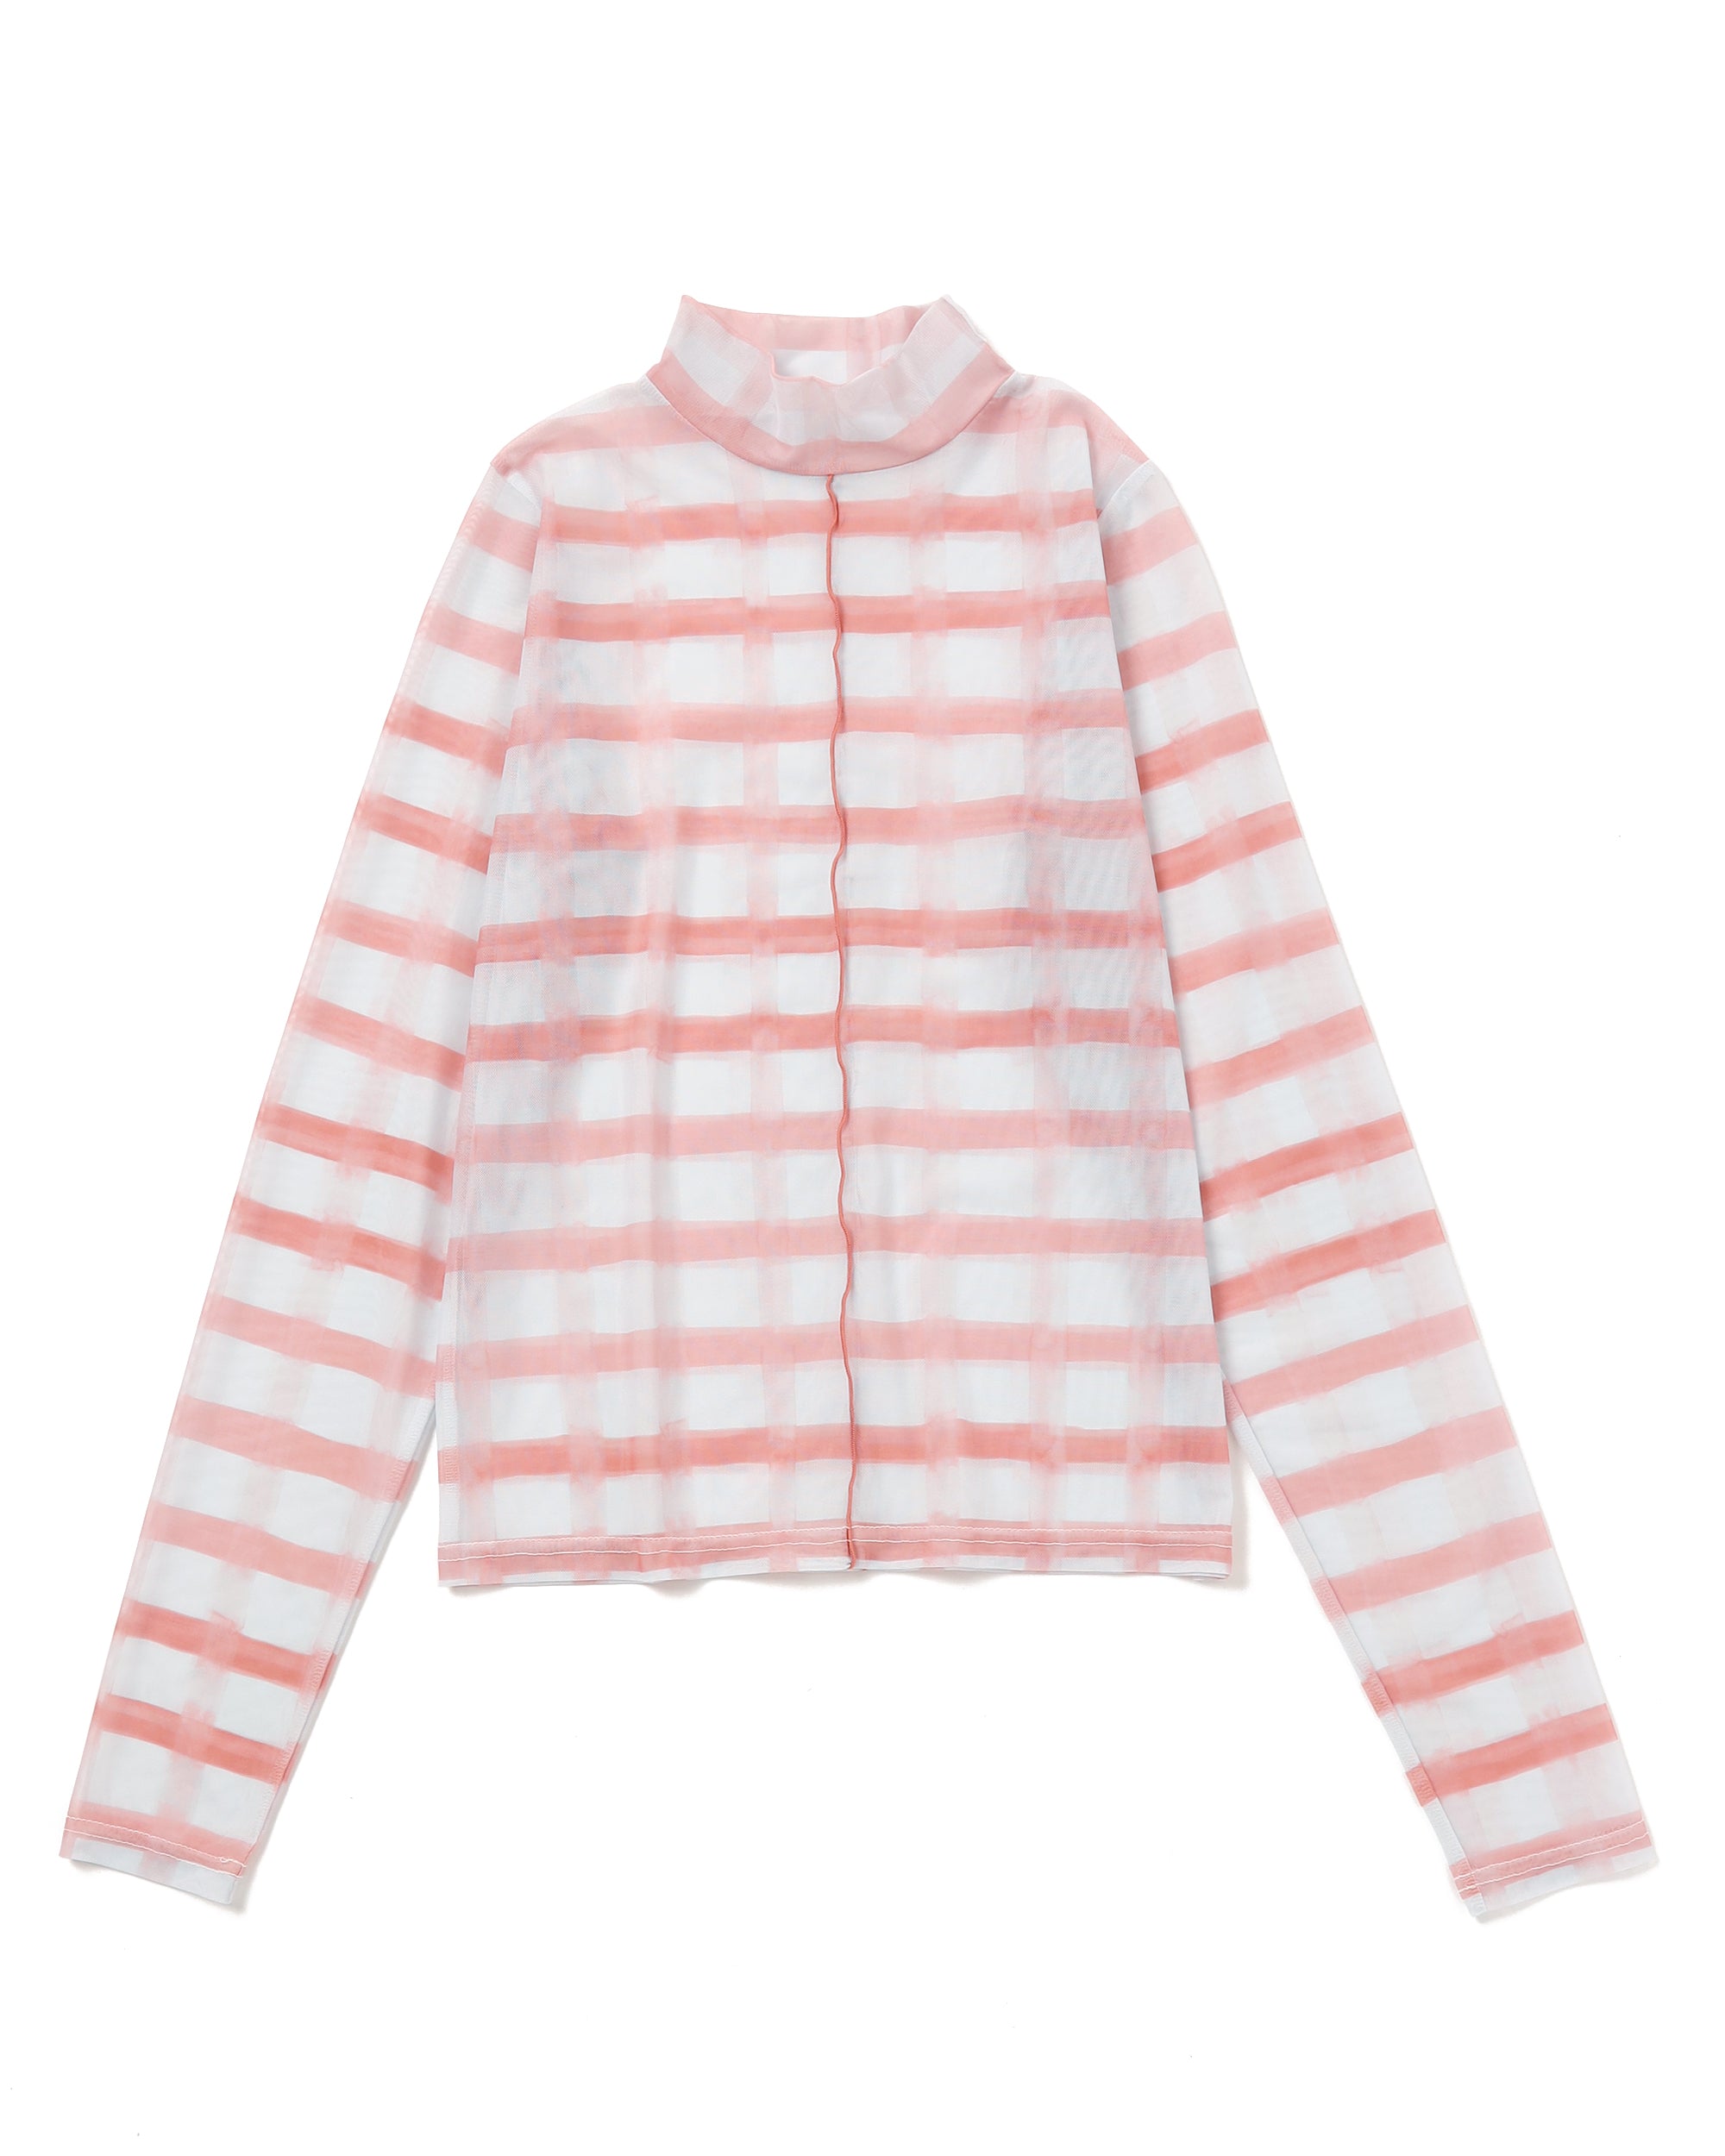 Rough check see-through tops Pink (High neck) – POPPY